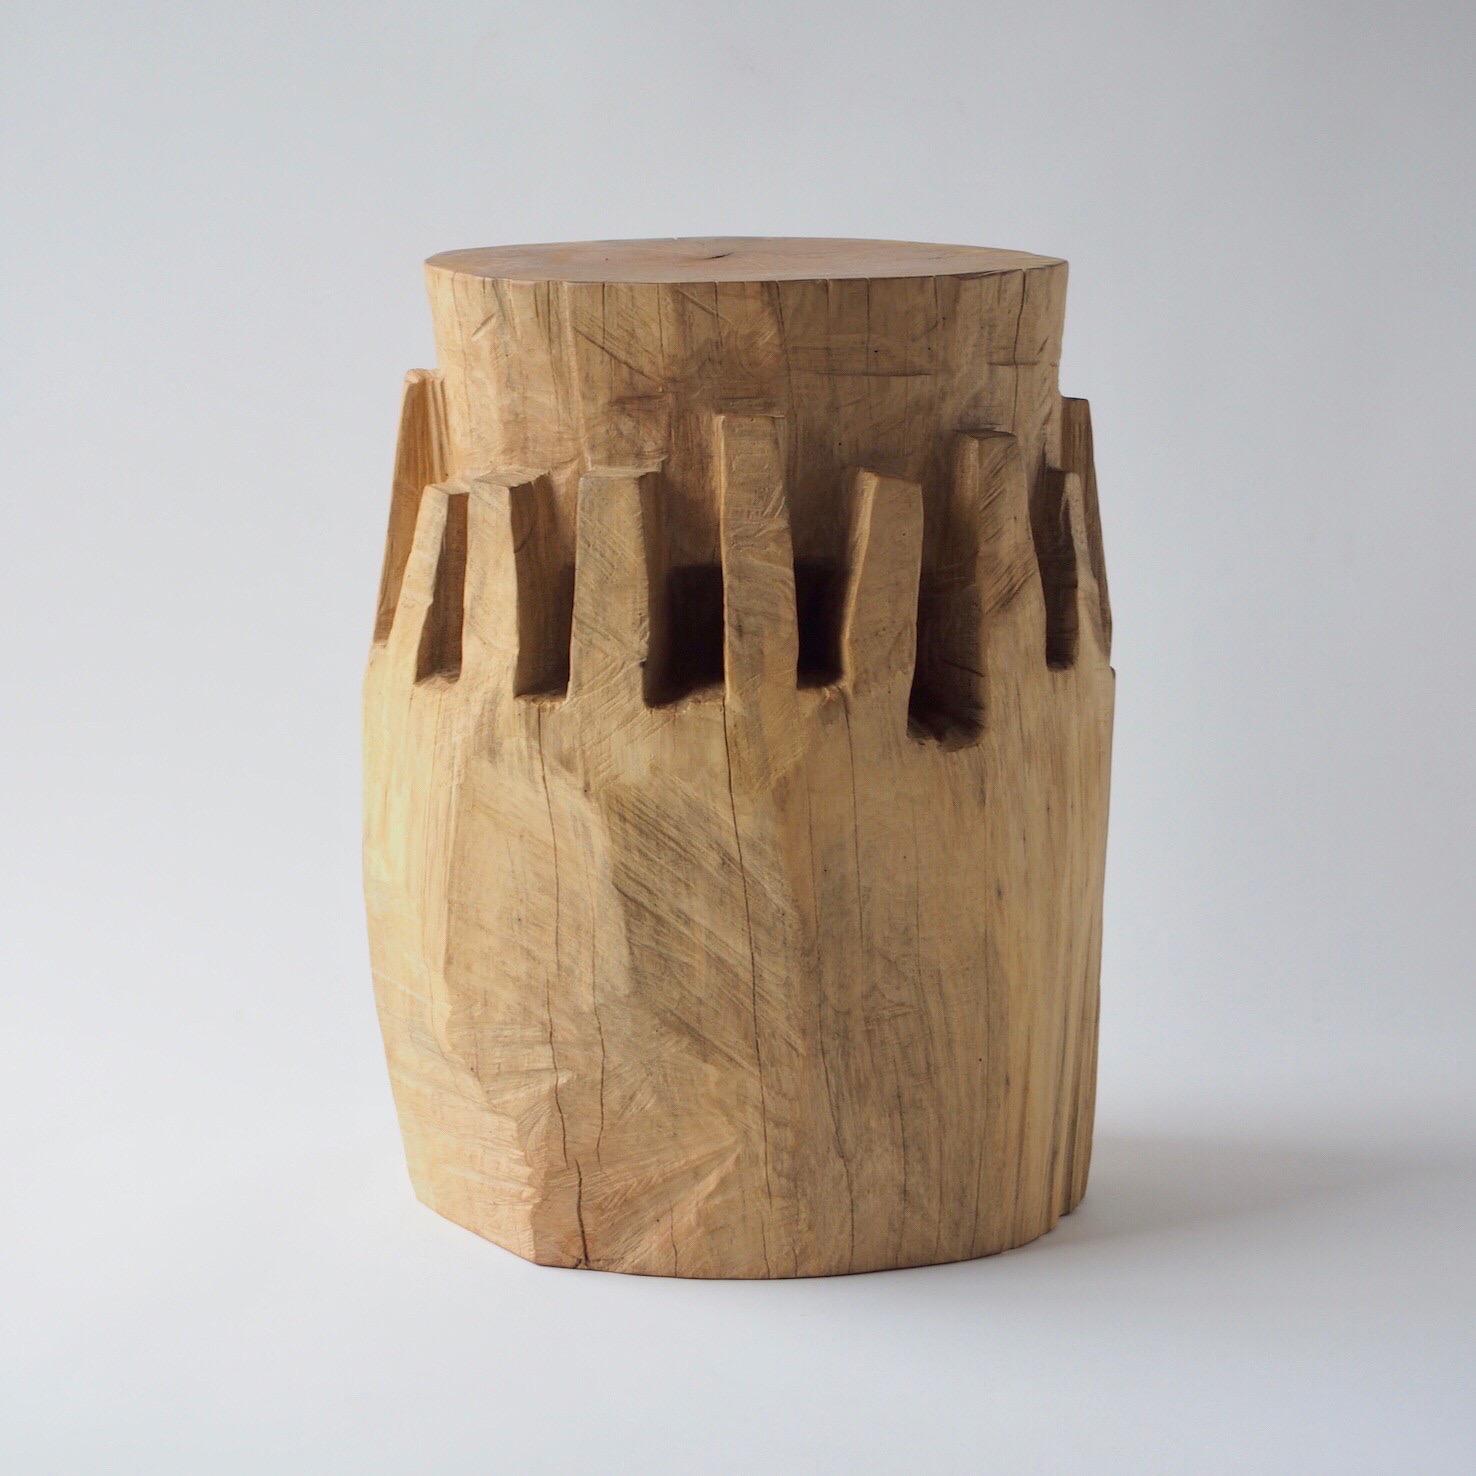 Name: On the glass
Sculptural stool by Zogei carved furniture
Material: Zelkova
This work is carved from log with some kinds of chainsaws.
Most of wood used for Nishimura's works are unable to use anything, these woods are unsuitable material